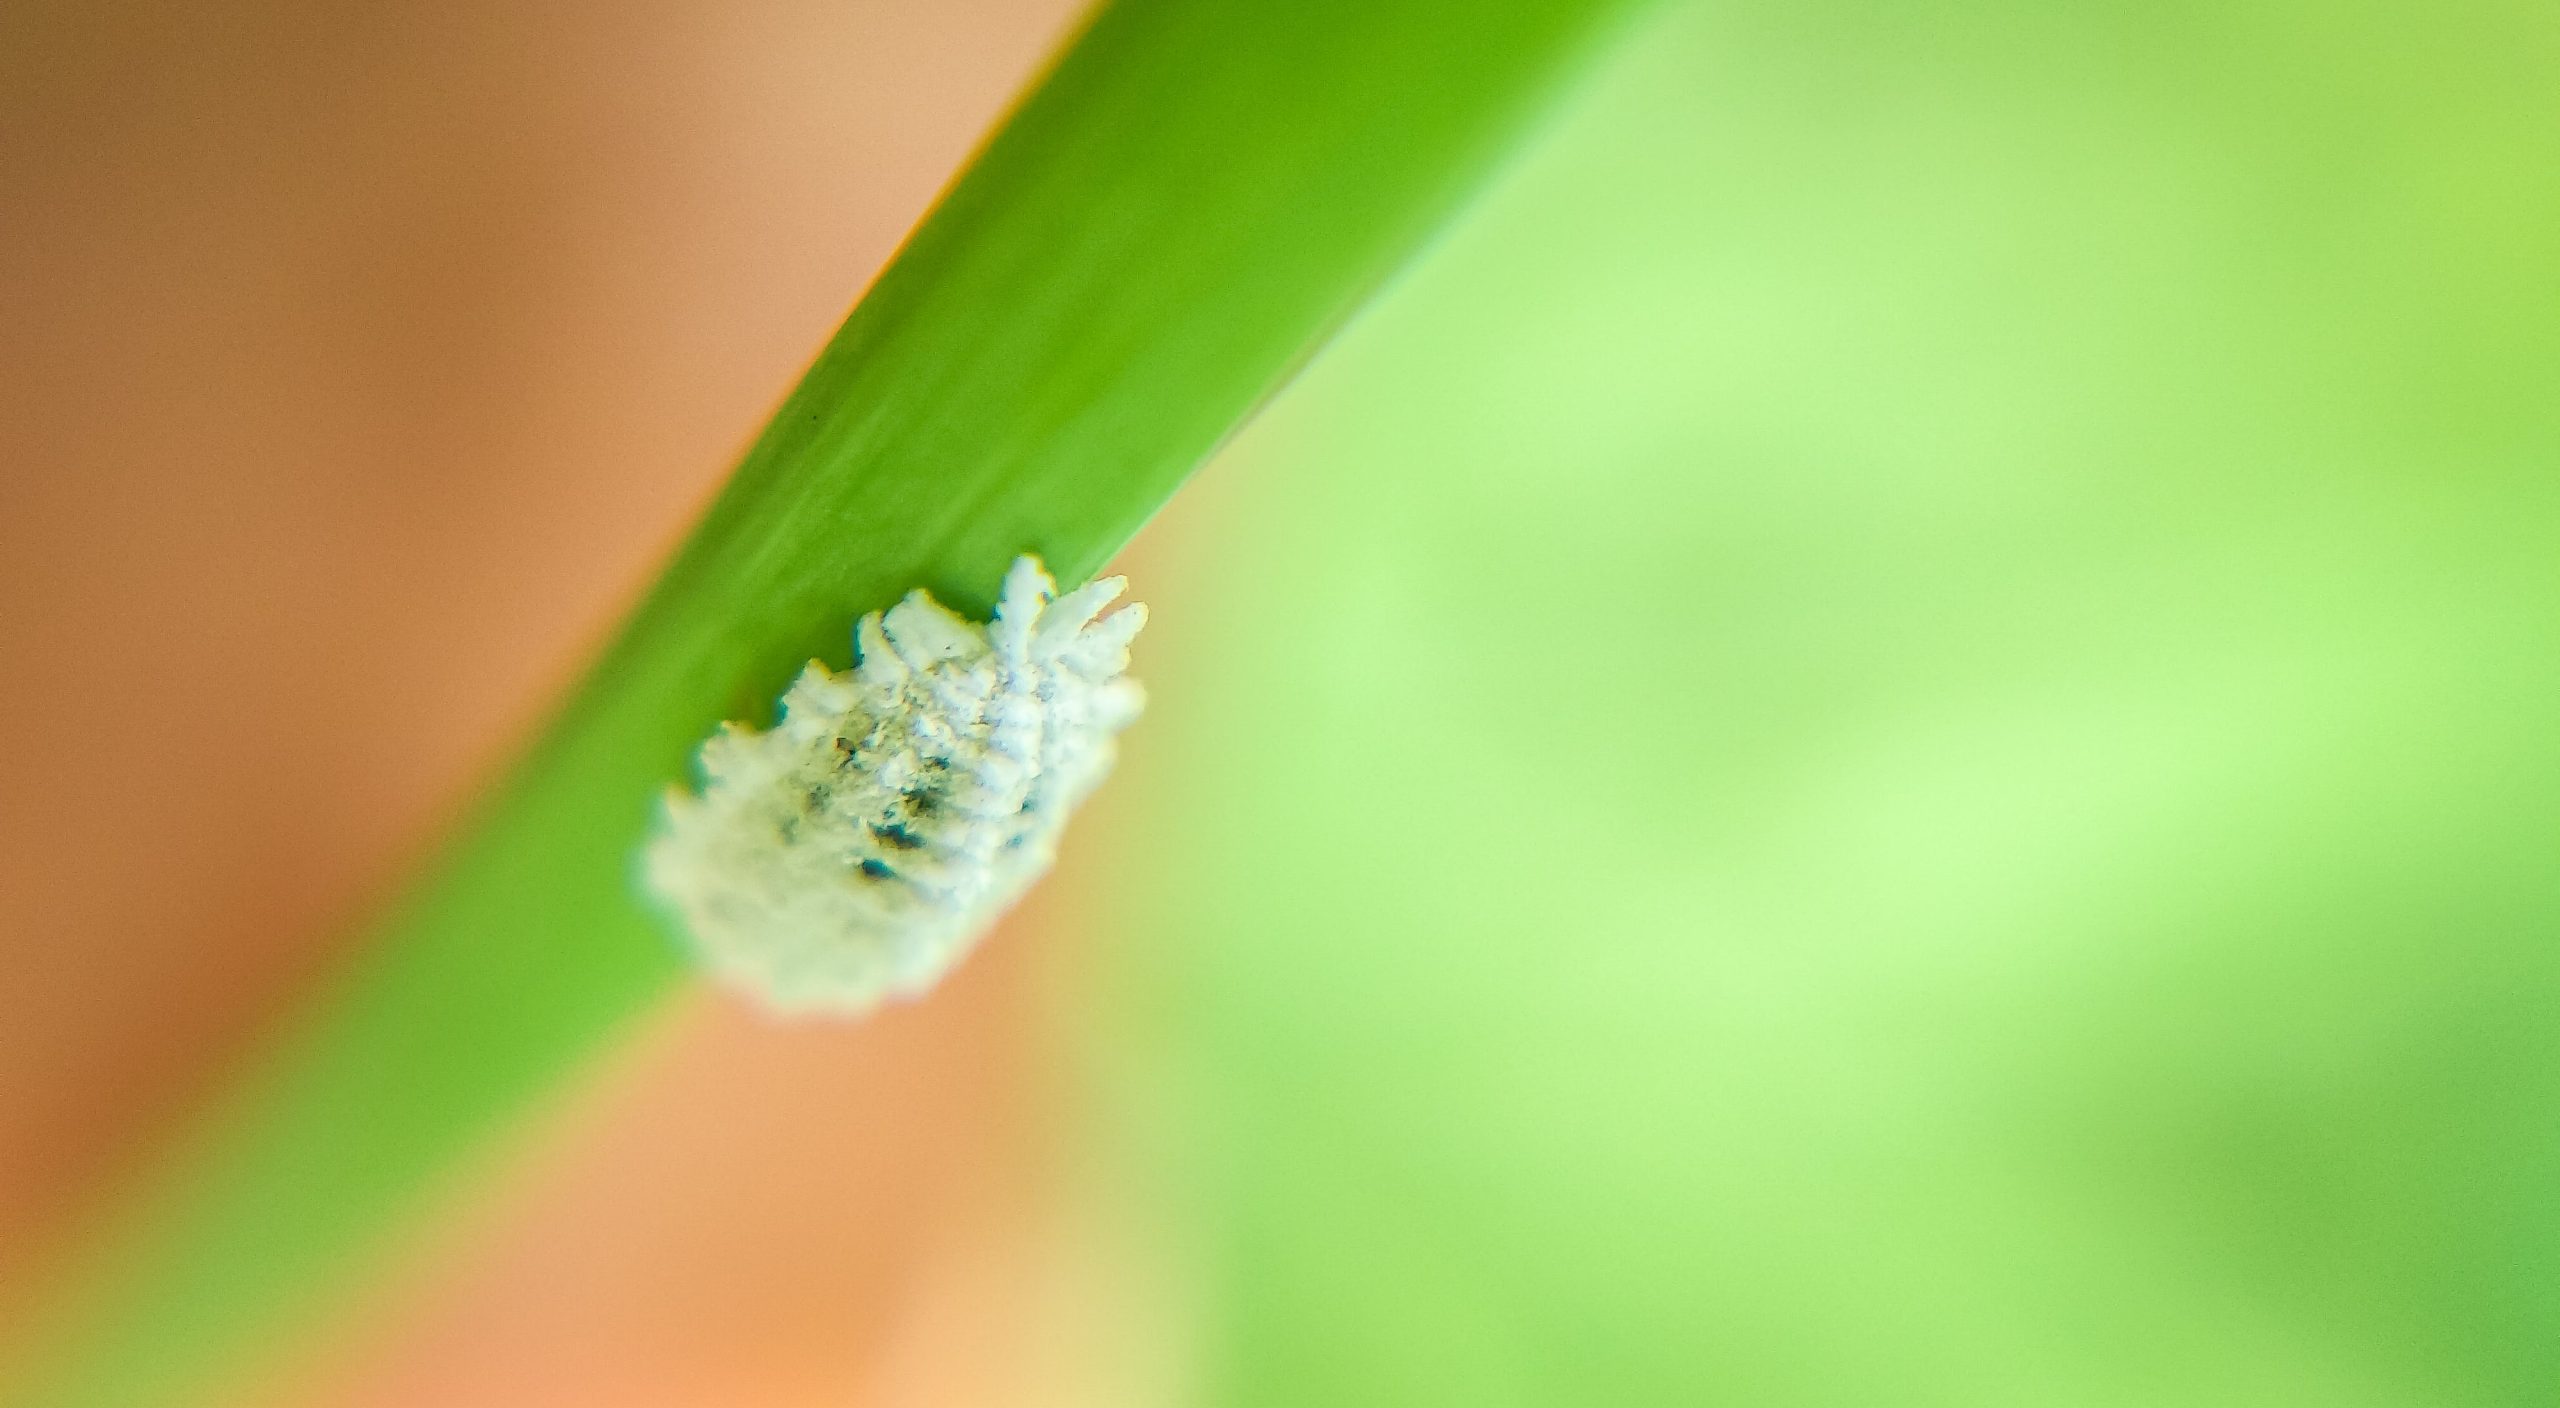 Mealybugs – What Are They and How Do I Get Rid of Them?